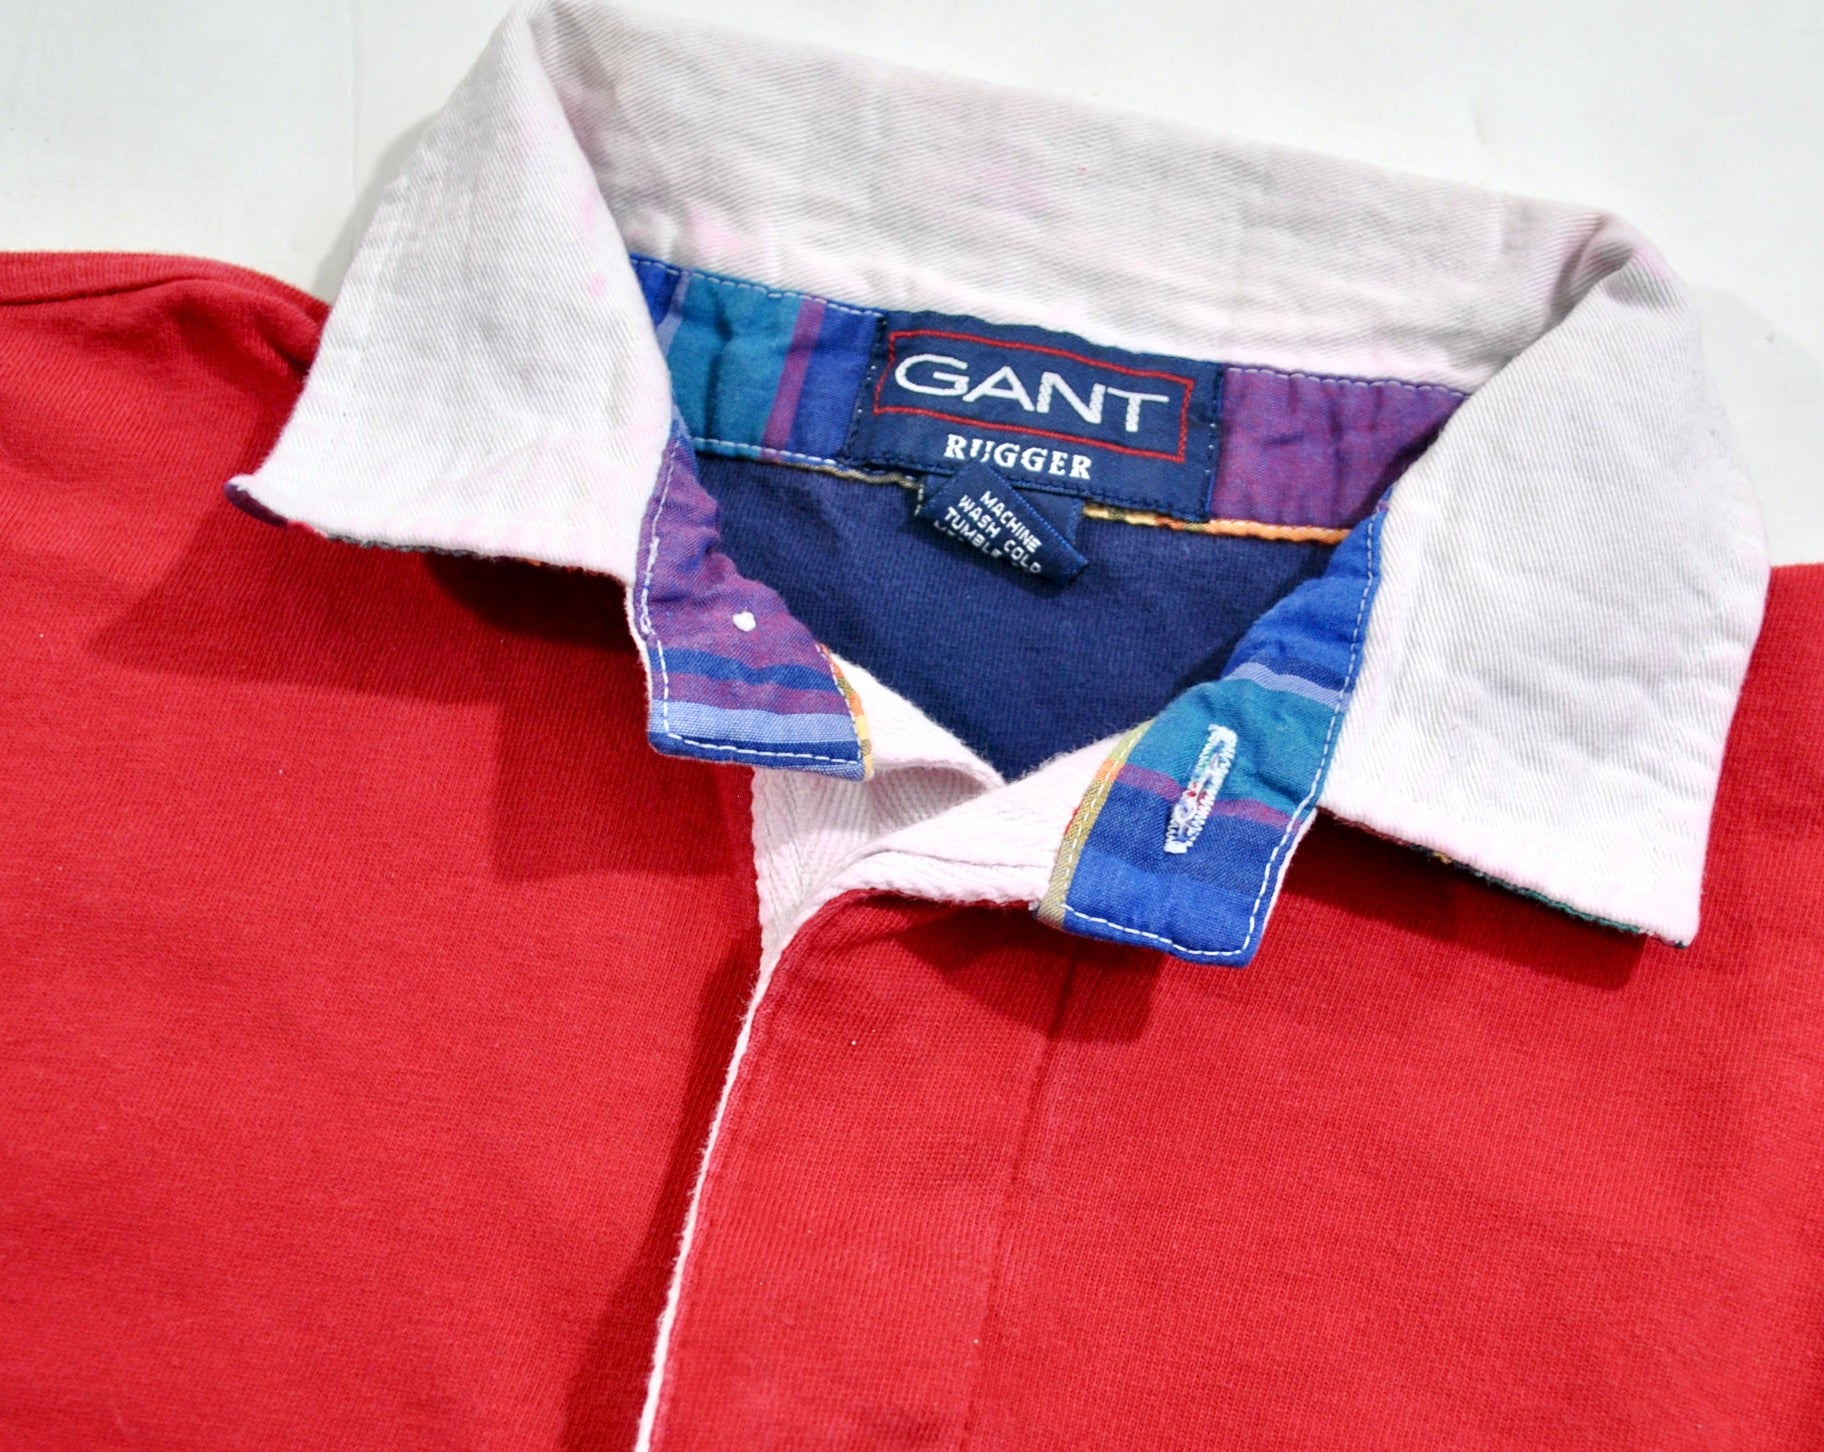 Vintage Gant Rugger Rugby Shirt Size Large – Yesterday's Attic